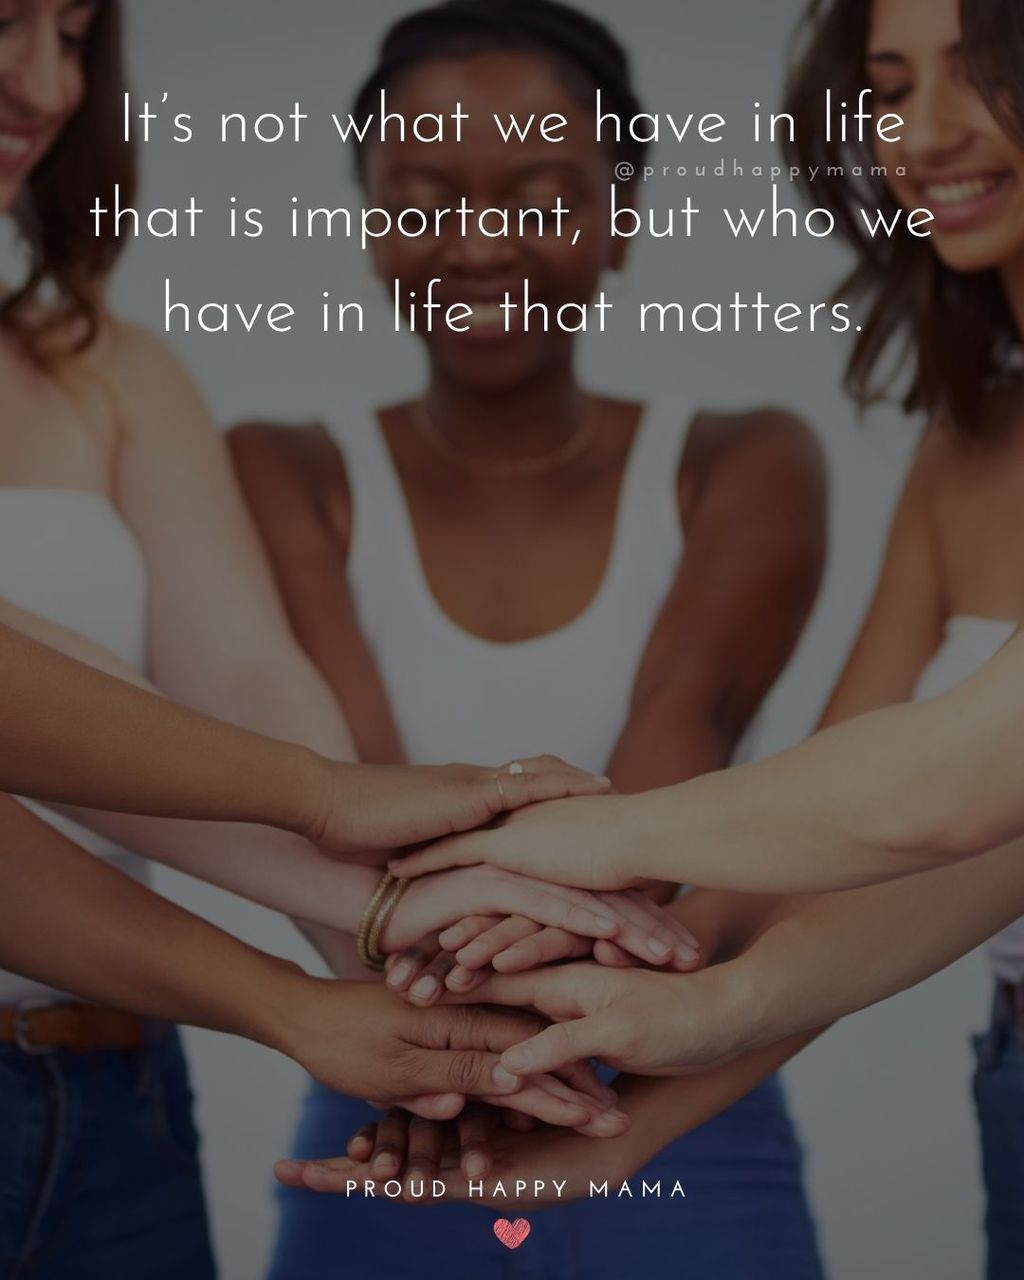 Sister Quotes - It’s not what we have in life that is important, but who we have in life that matters.